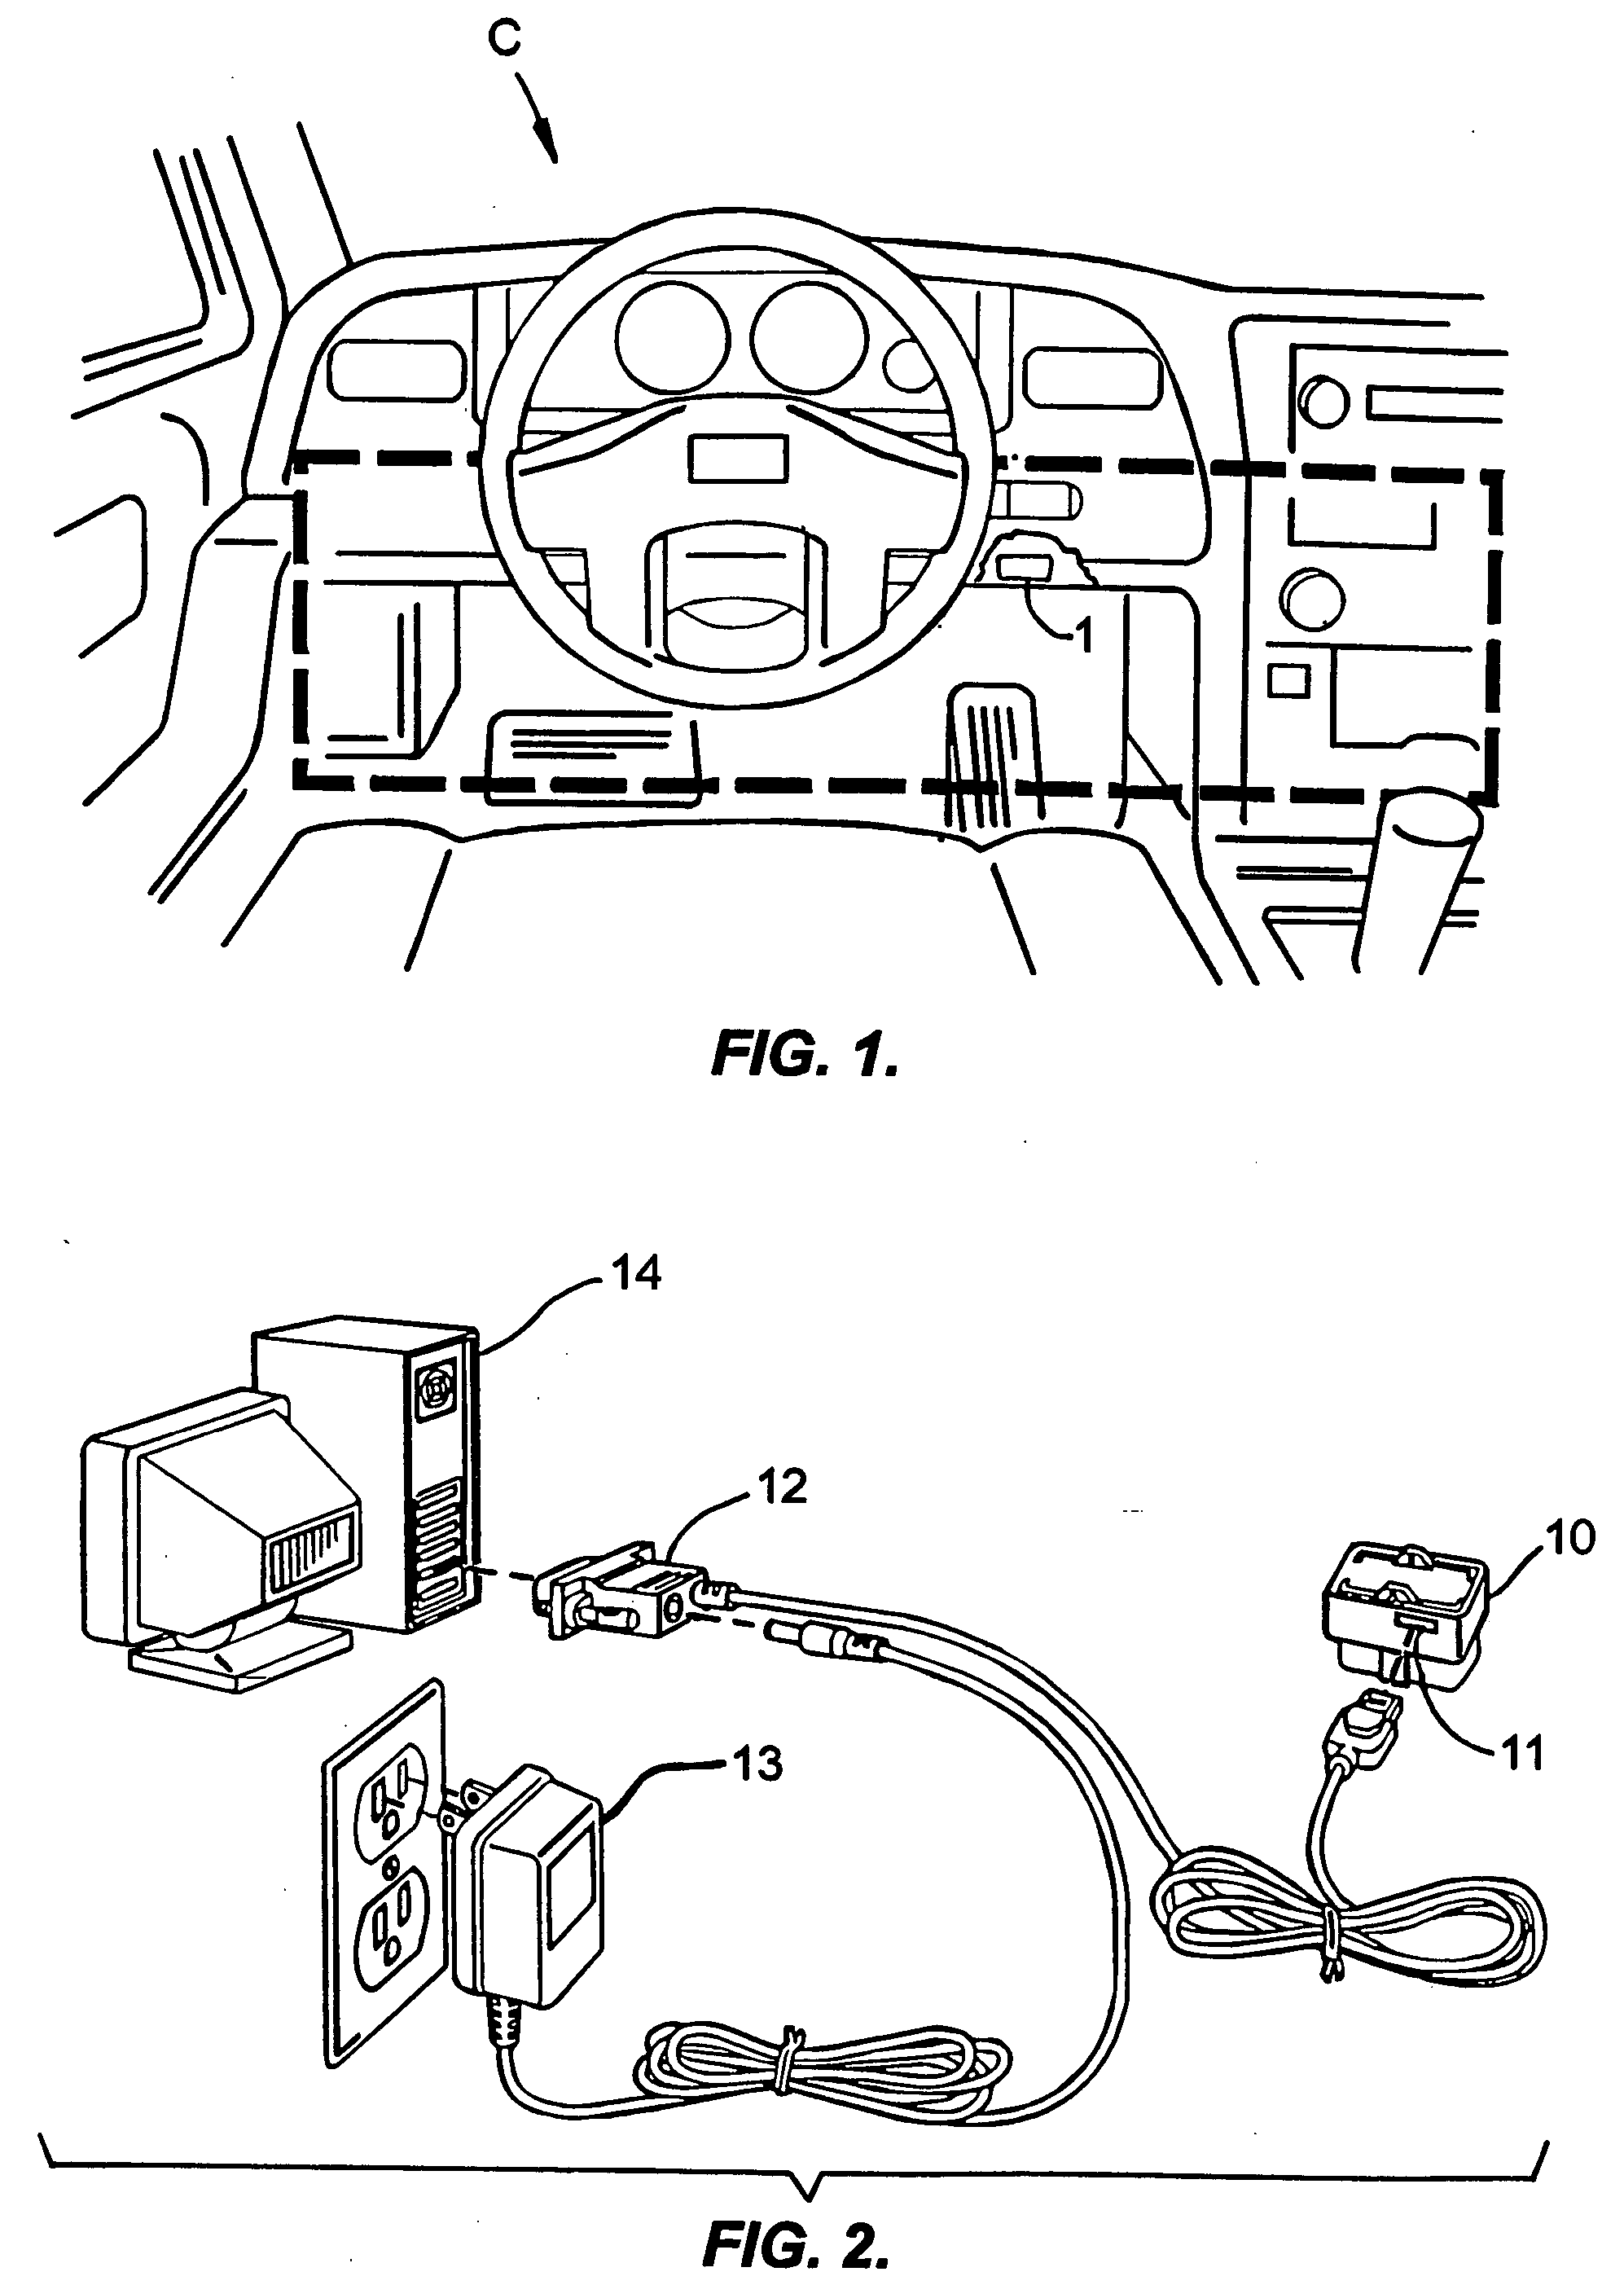 Module for monitoring vehicle operation through onboard diagnostic port